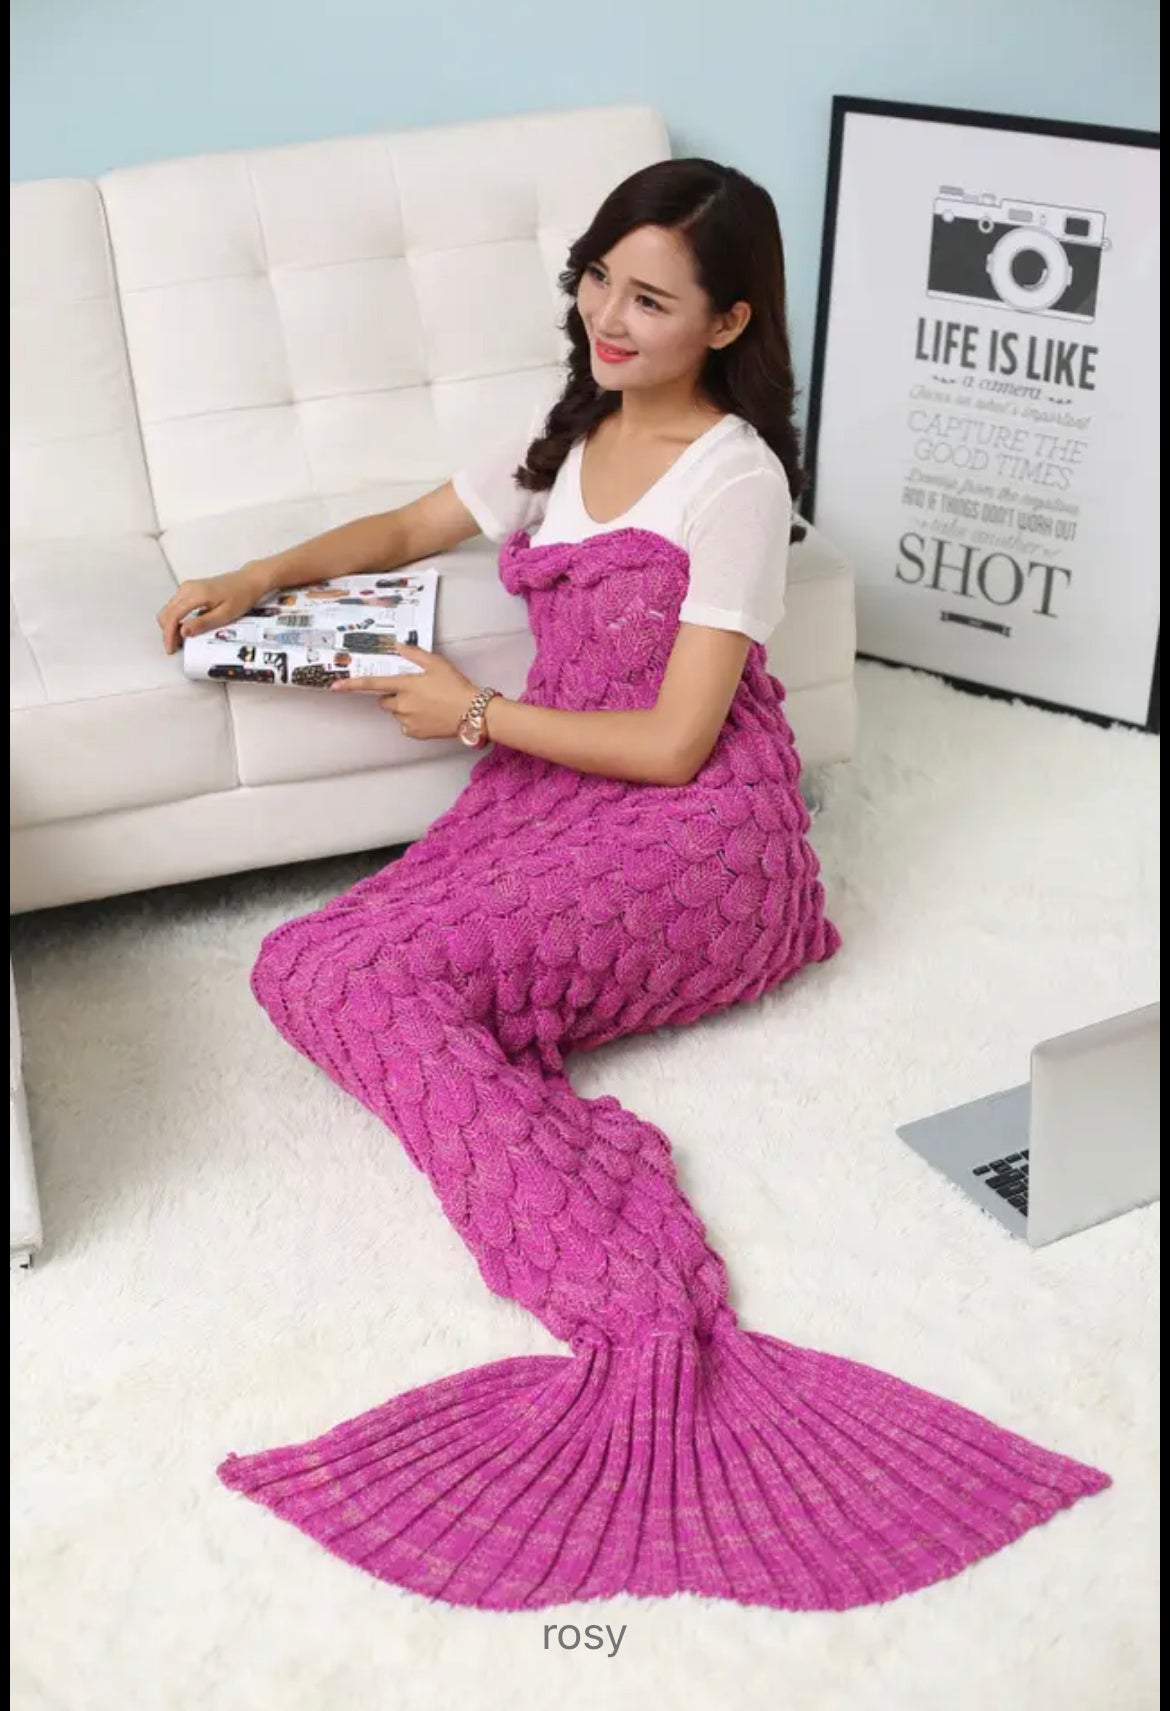 "Embroidered Mermaid Tail Blanket - Pink Delight" Description: "A soft and snug pink mermaid tail blanket featuring intricate embroidery of a personalized name, adding a personal touch."